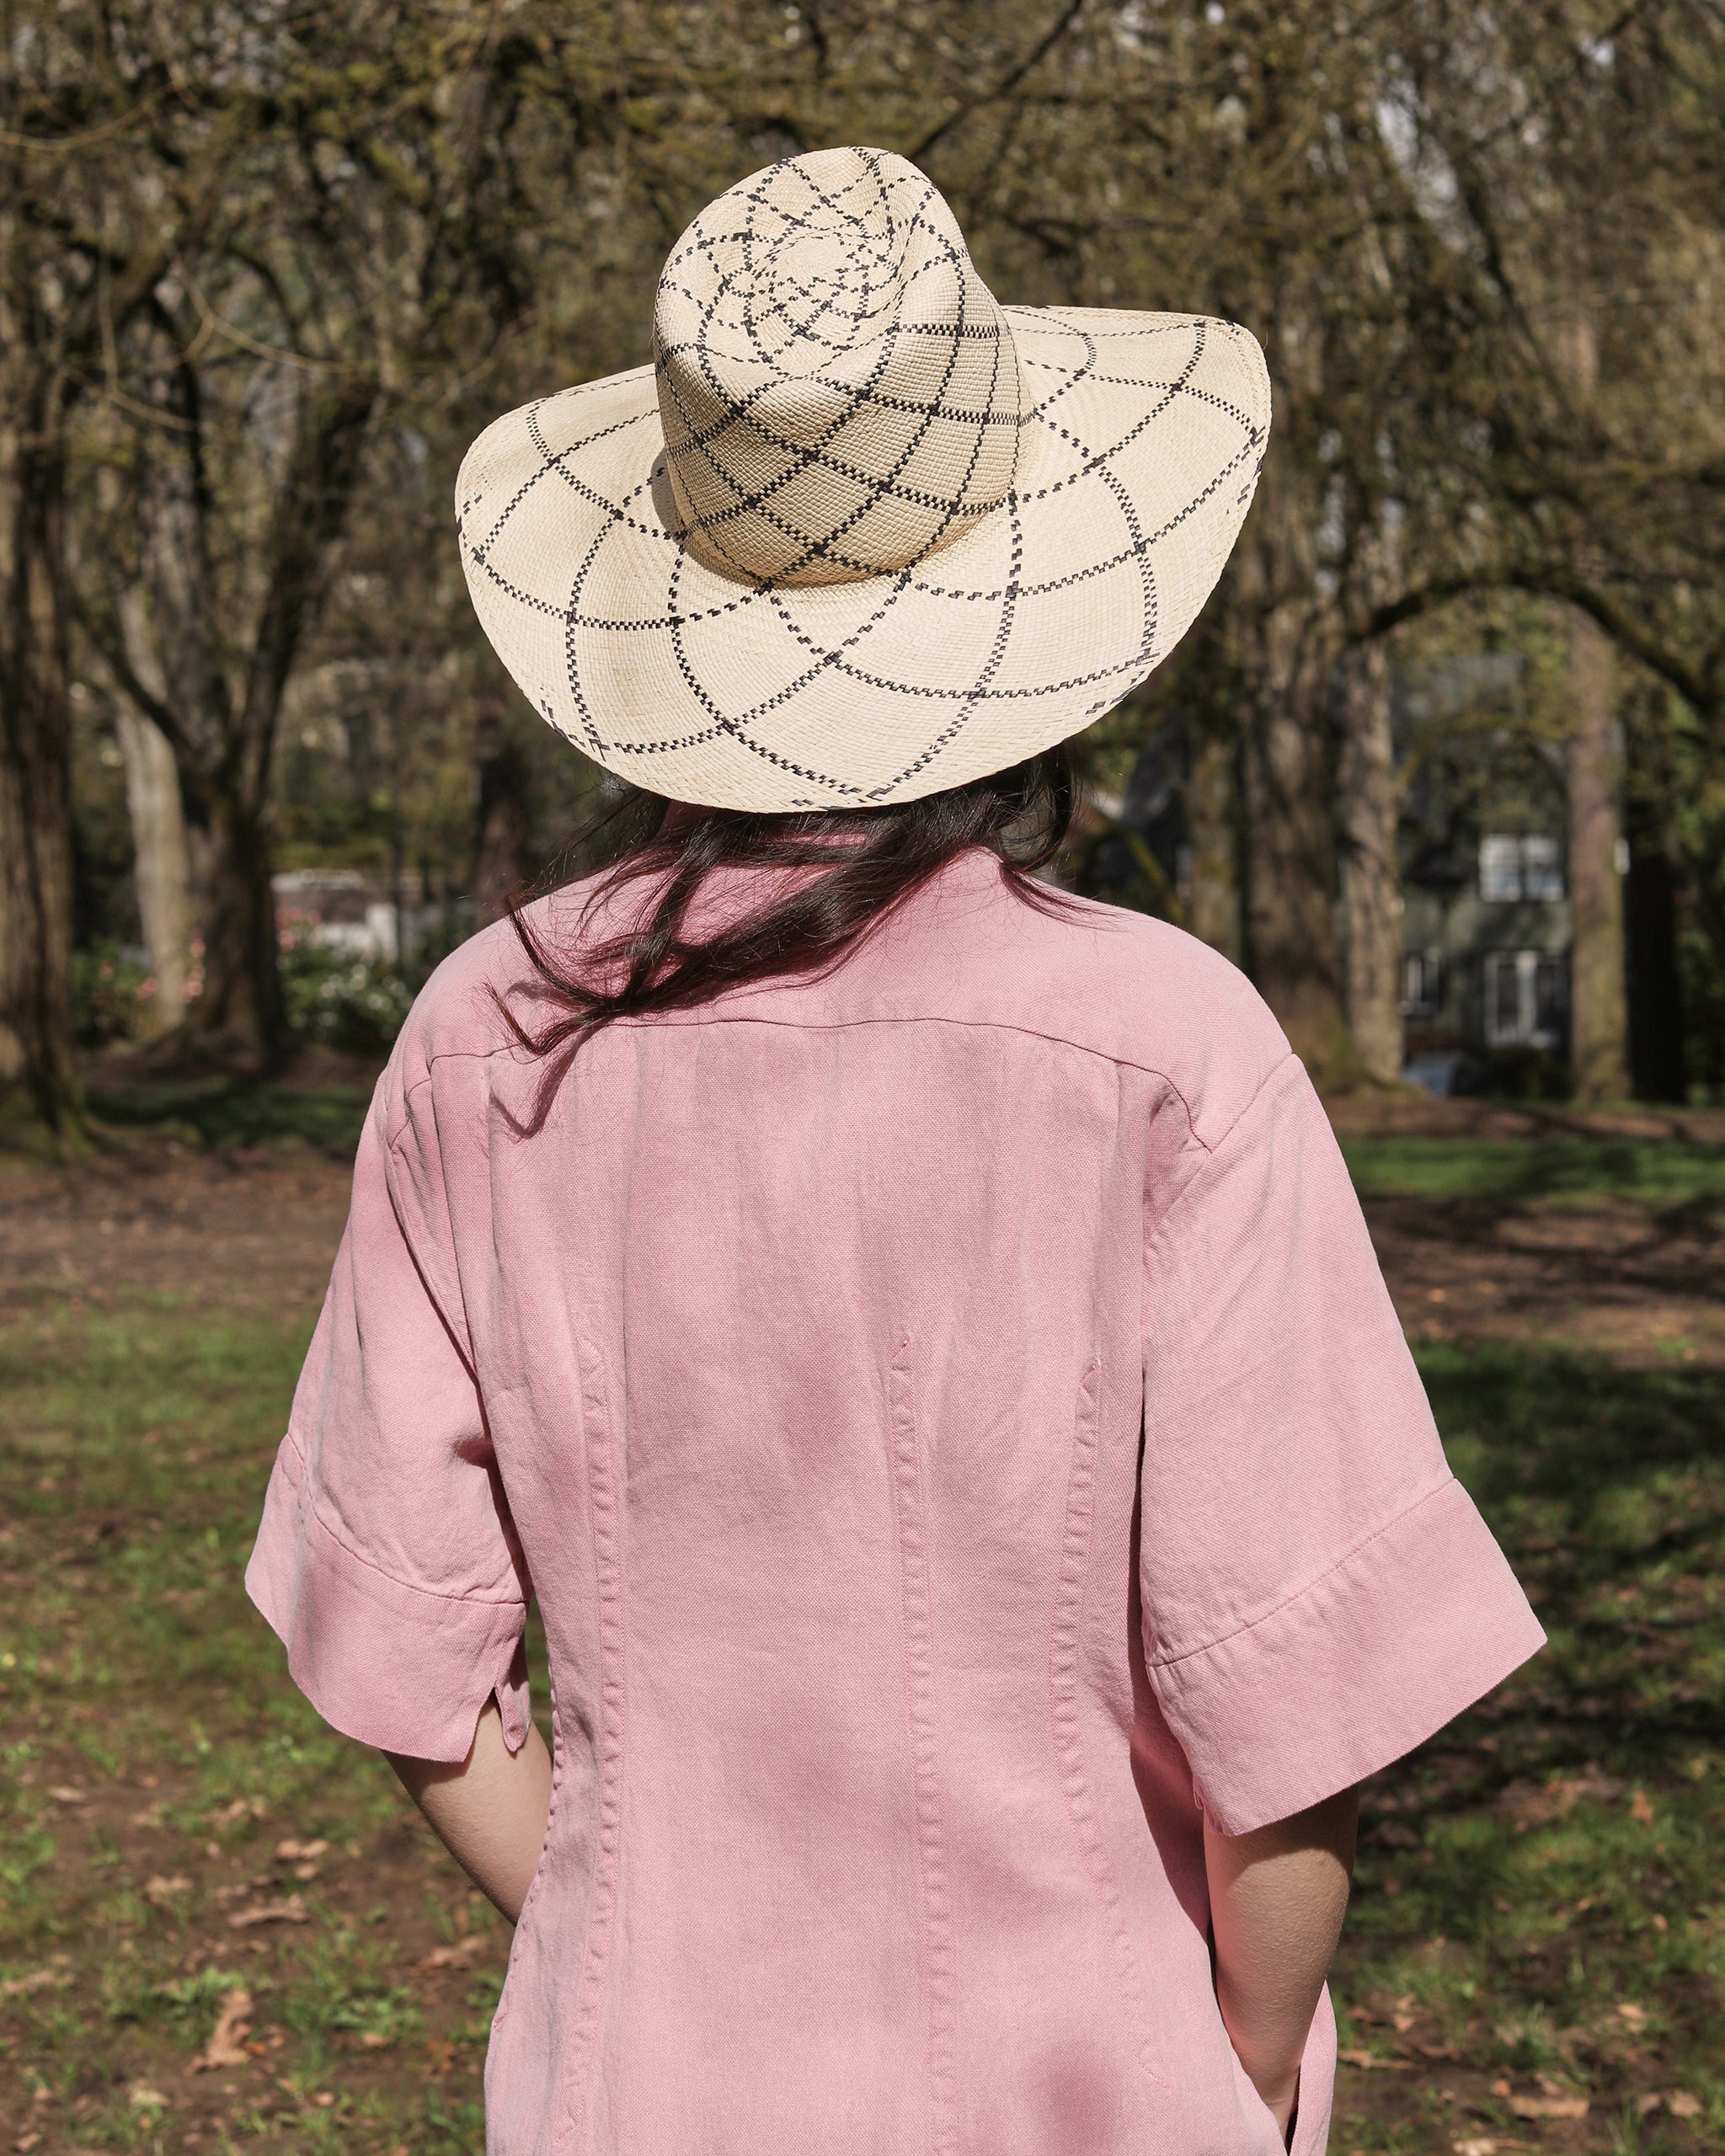 MARKET HAT IN CHECK PANAMA STRAW